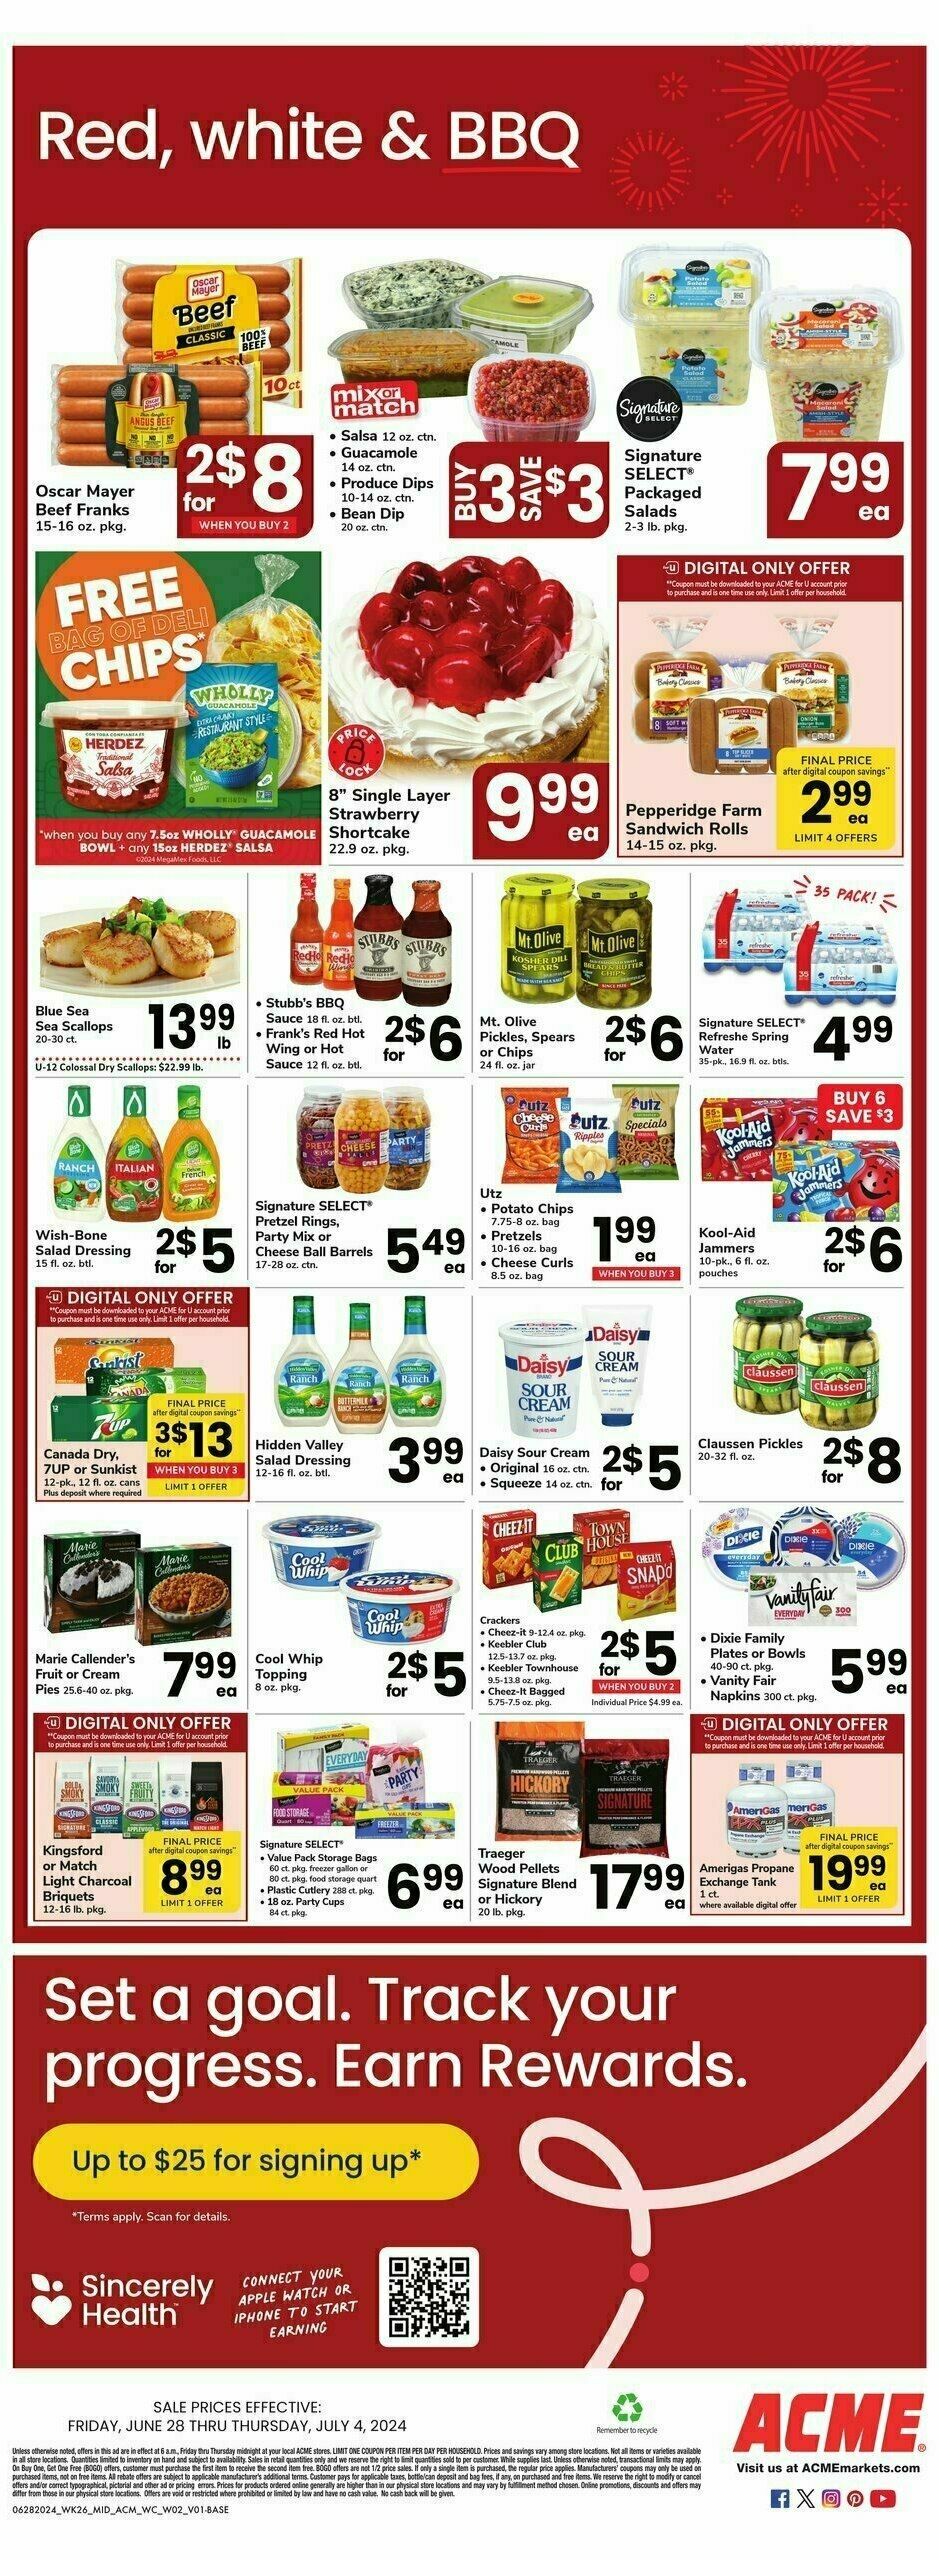 ACME Markets Weekly Ad from June 28